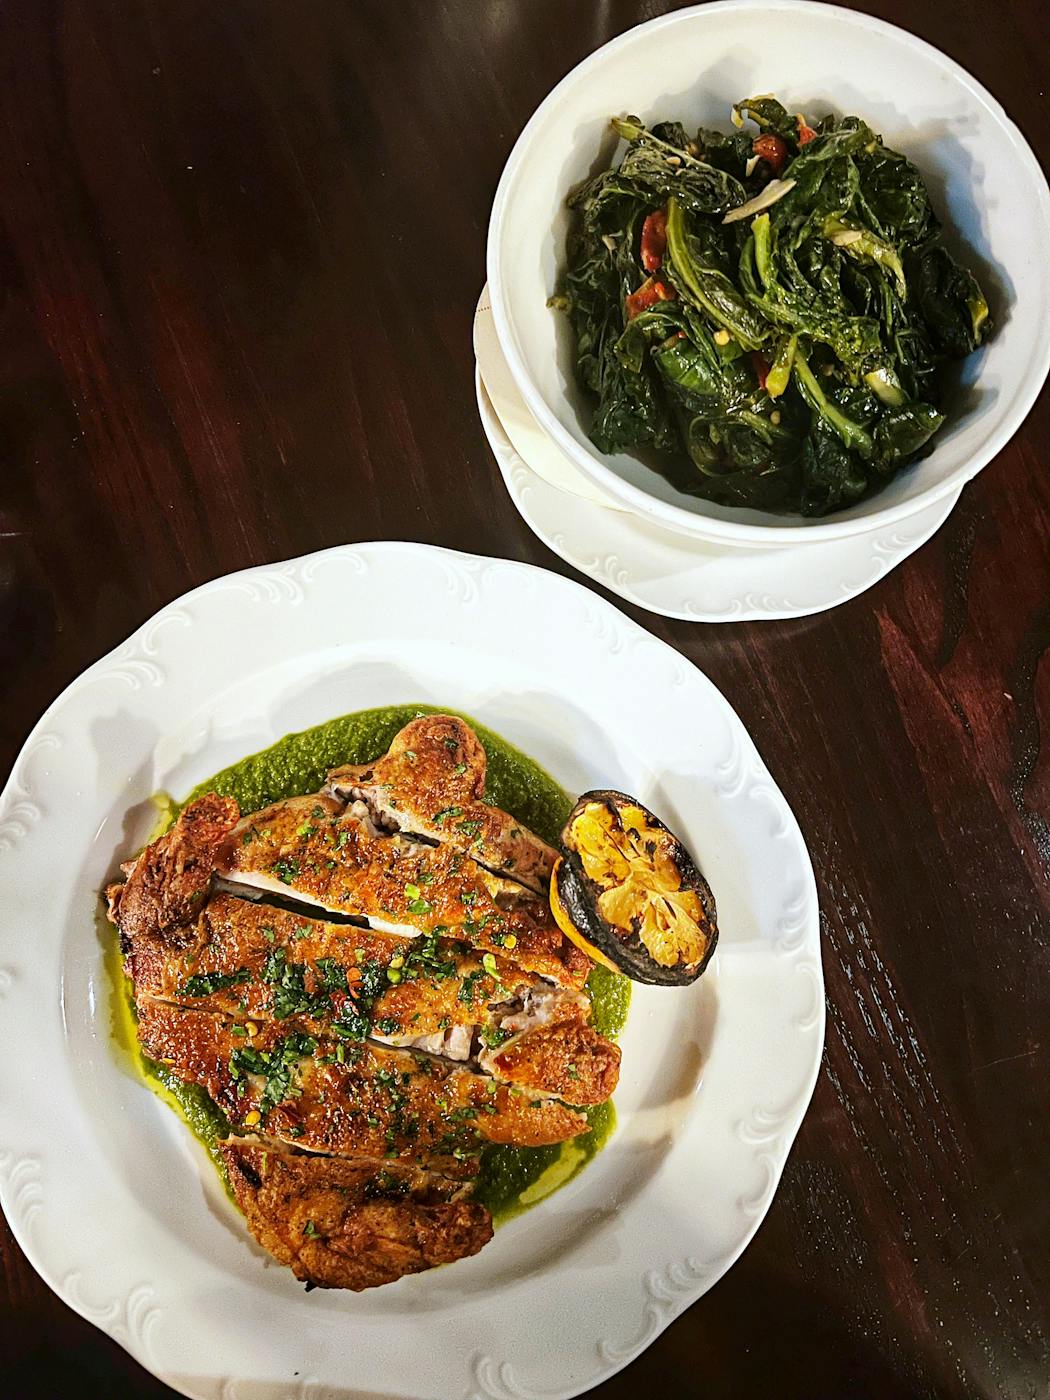 The game hen and Chinese broccoli from Snack Bar serve as a North Loop late dinner.